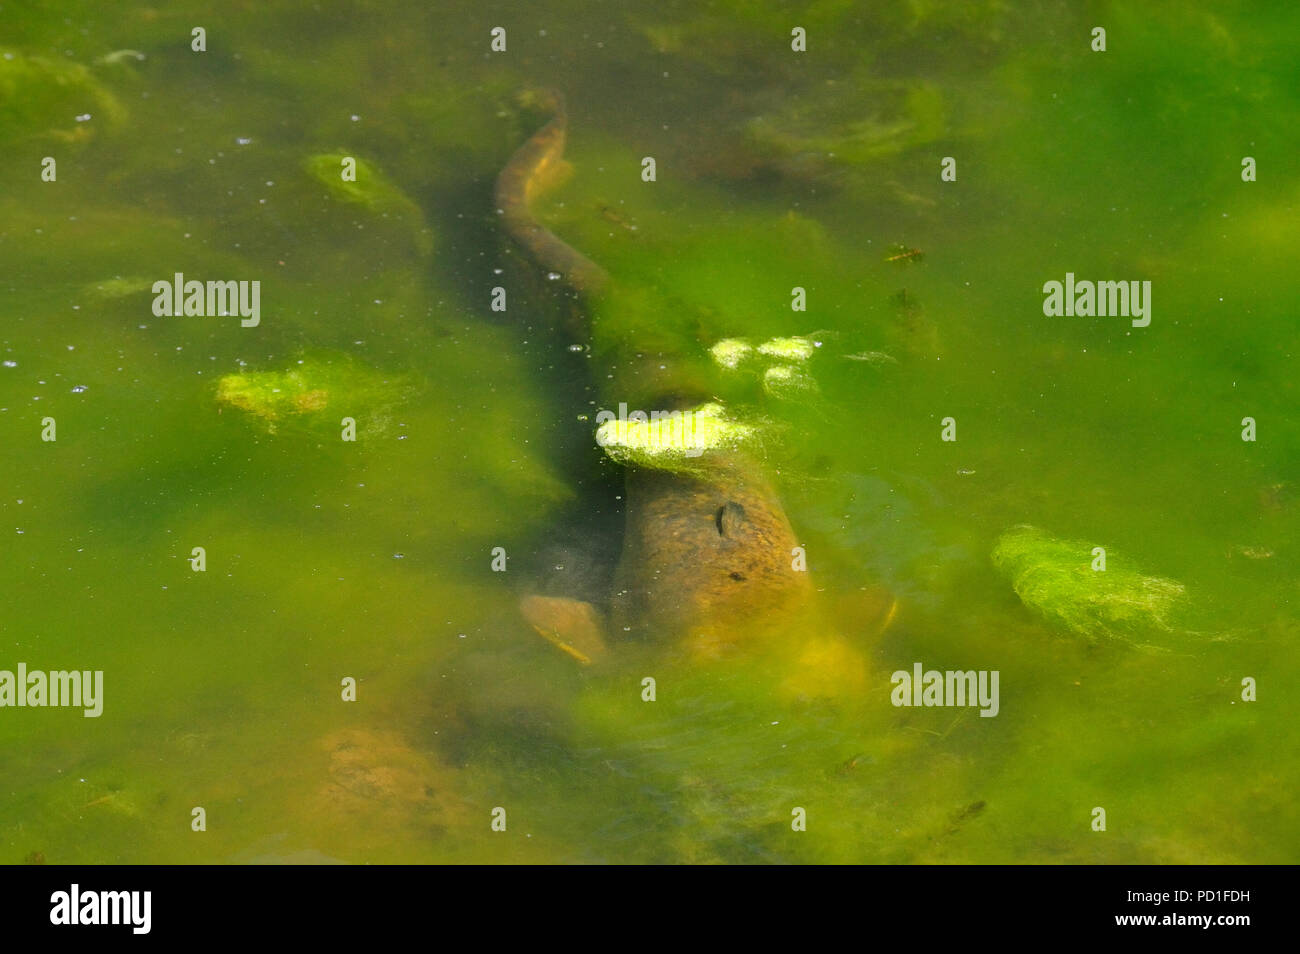 Befordshire, UK. 5 August 2018. Wildlife. Monster 5 foot Catfish spotted in pond at Wrest Park, This fish is a European Wels Catfish (Silurus glanis) , the largest freshwater fish found in Europe. It was first introduced into UK waters by the Duke of Bedford at Woburn Abbey in the 1880's.  Wrest Park, Silsoe, Bedfordshire, England UK Stock Photo